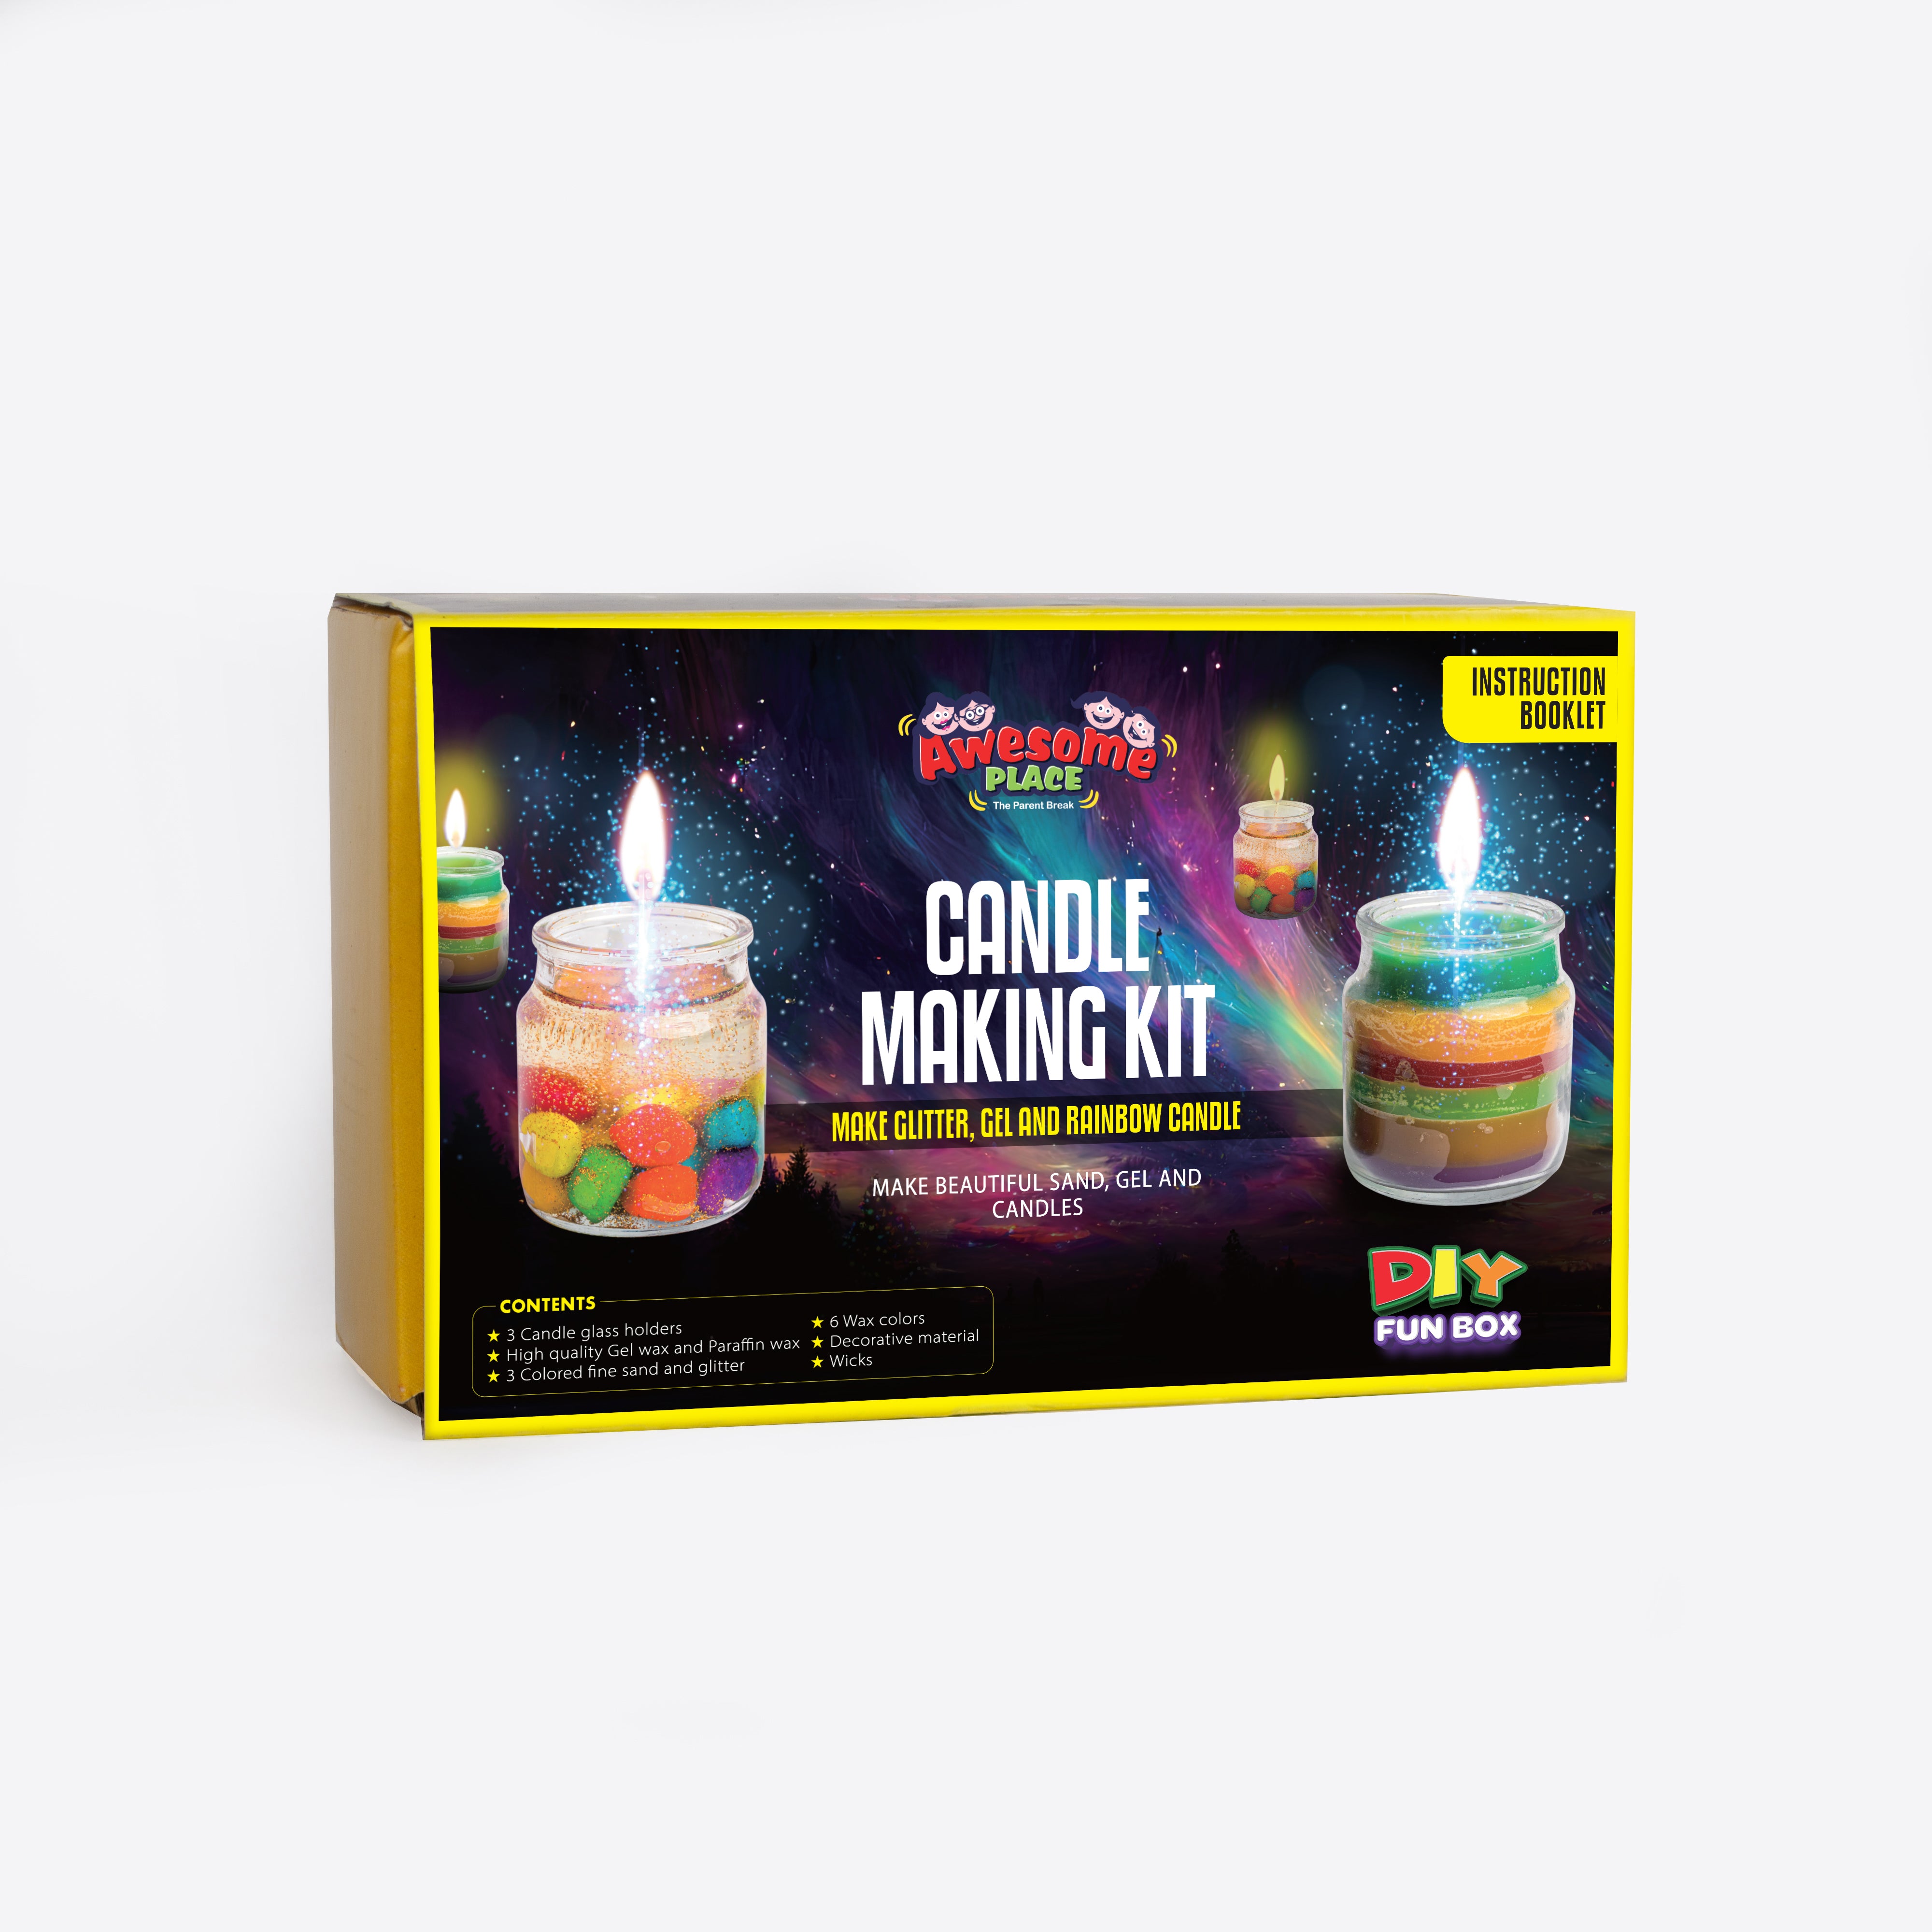 At Home Candle Making Kit